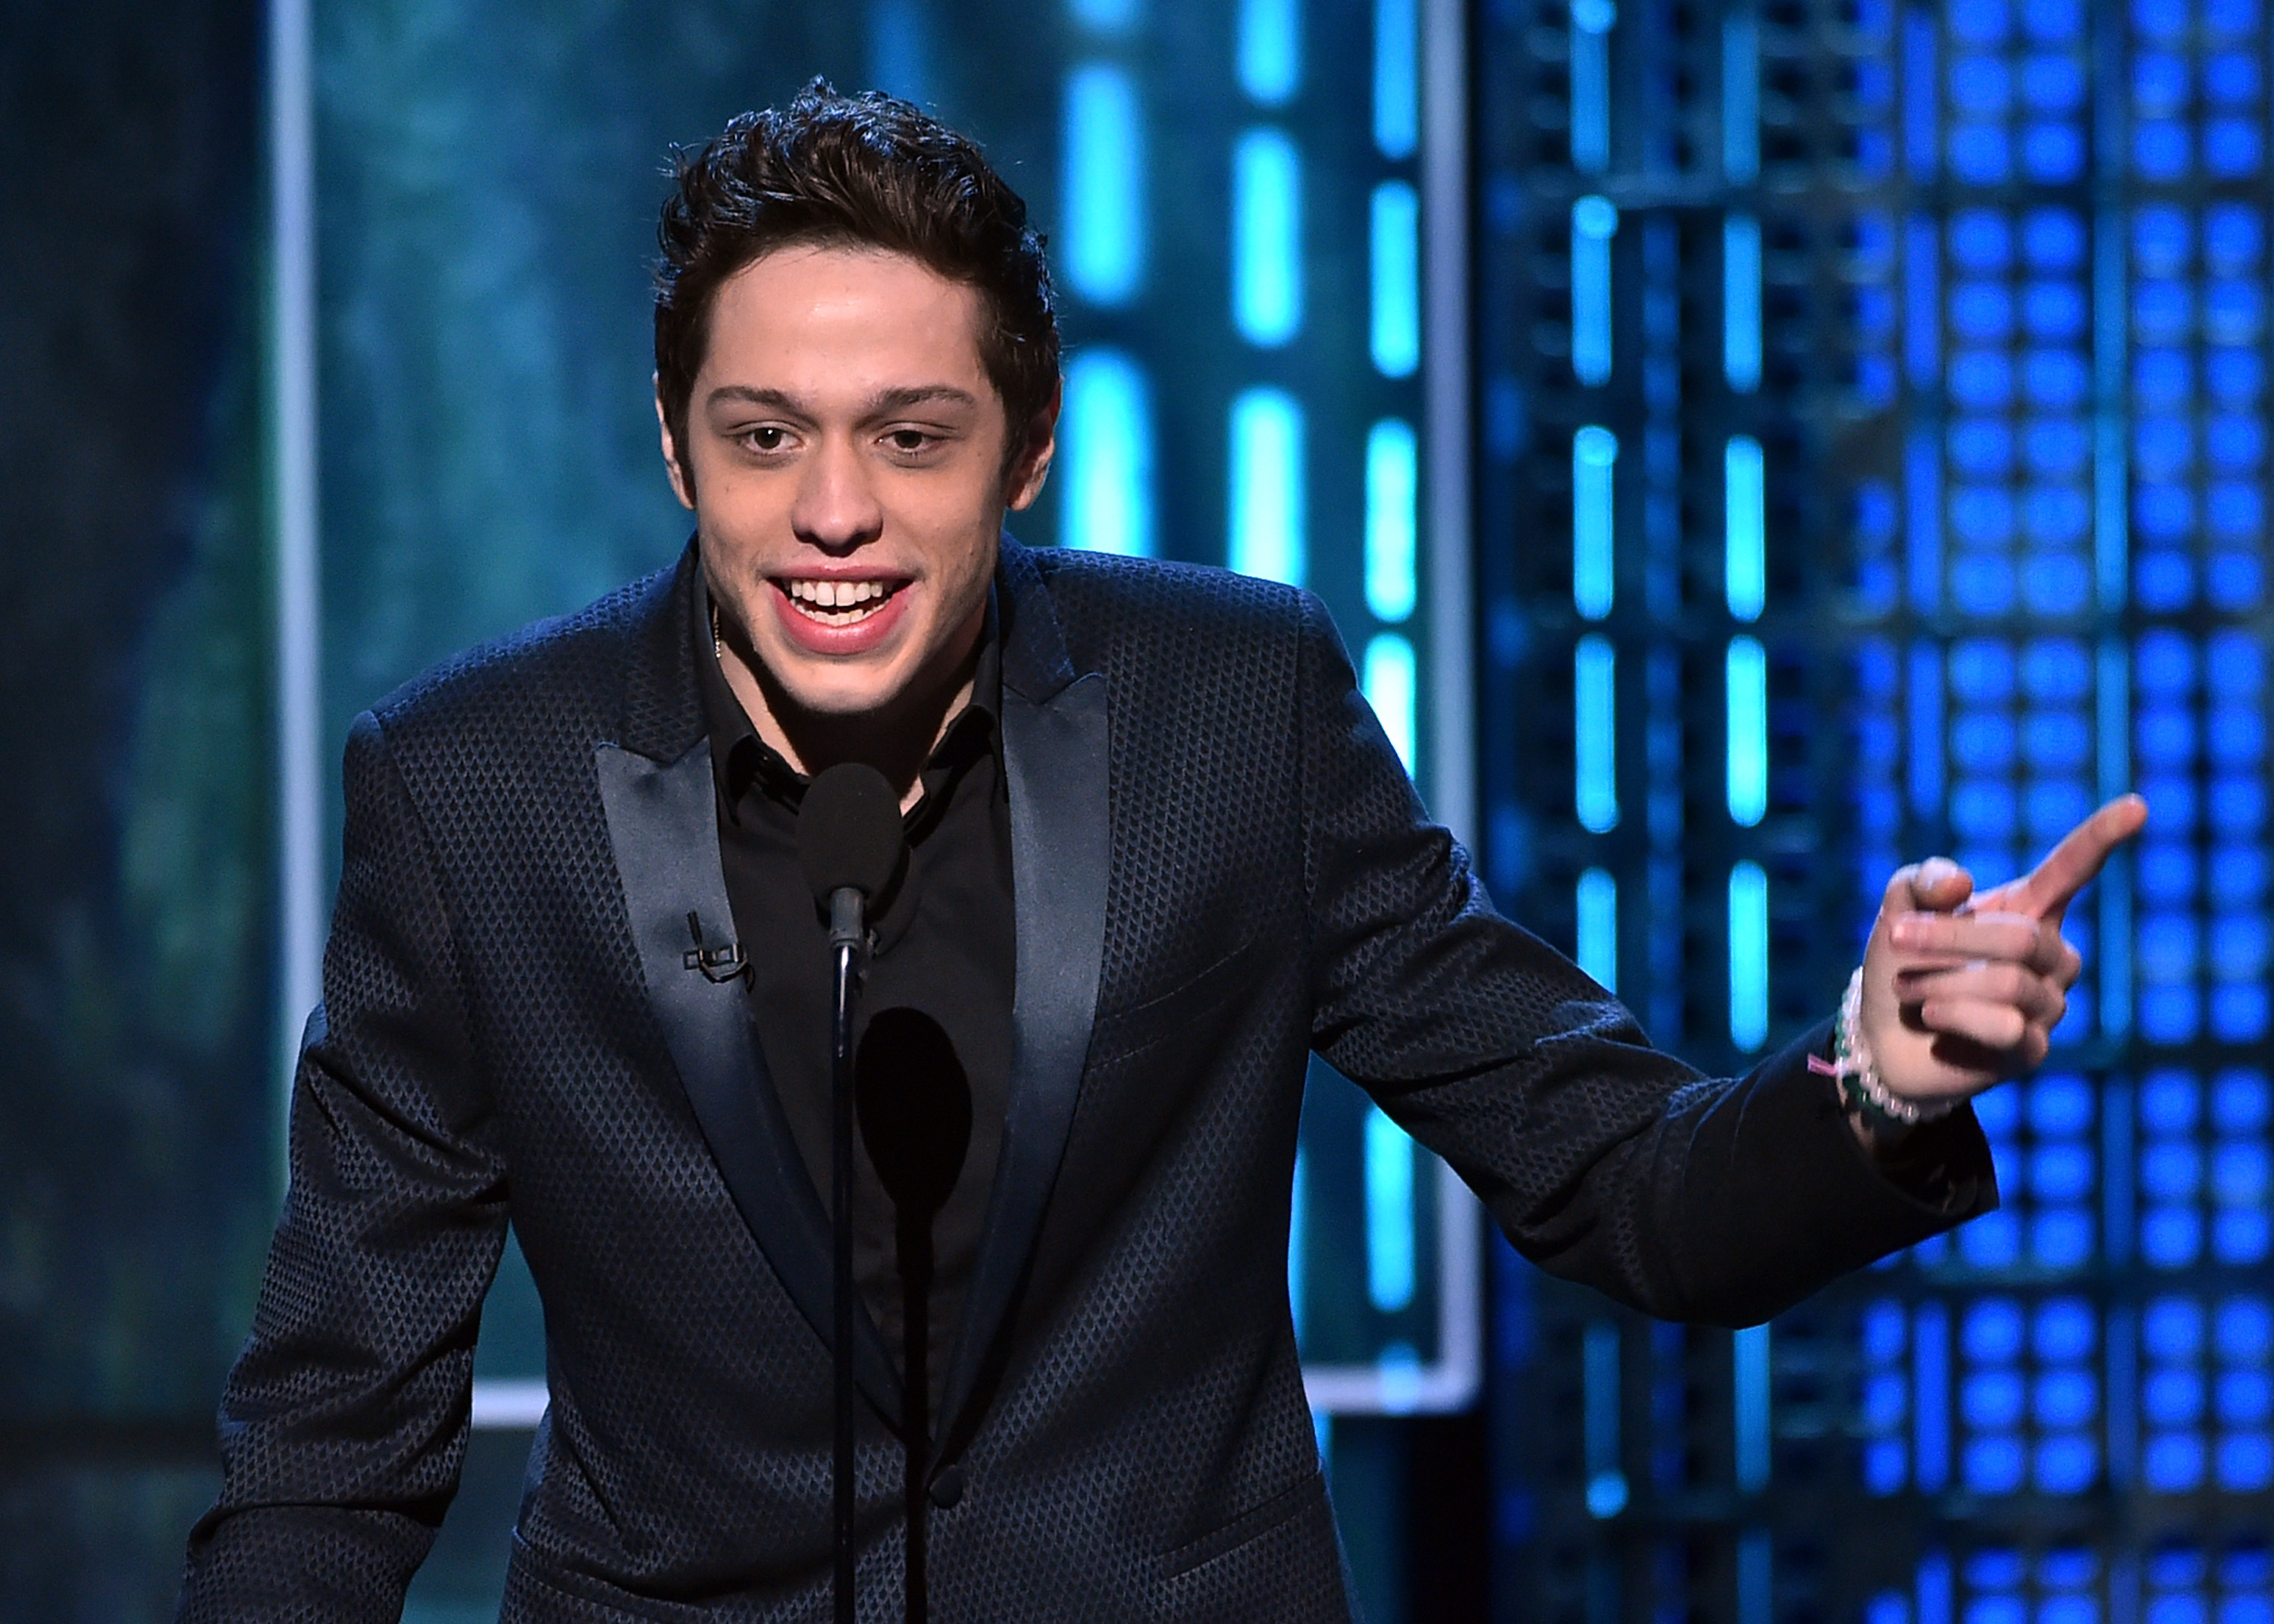 Pete Davidson Cancels Another Appearance After Ariana Grande Breakup